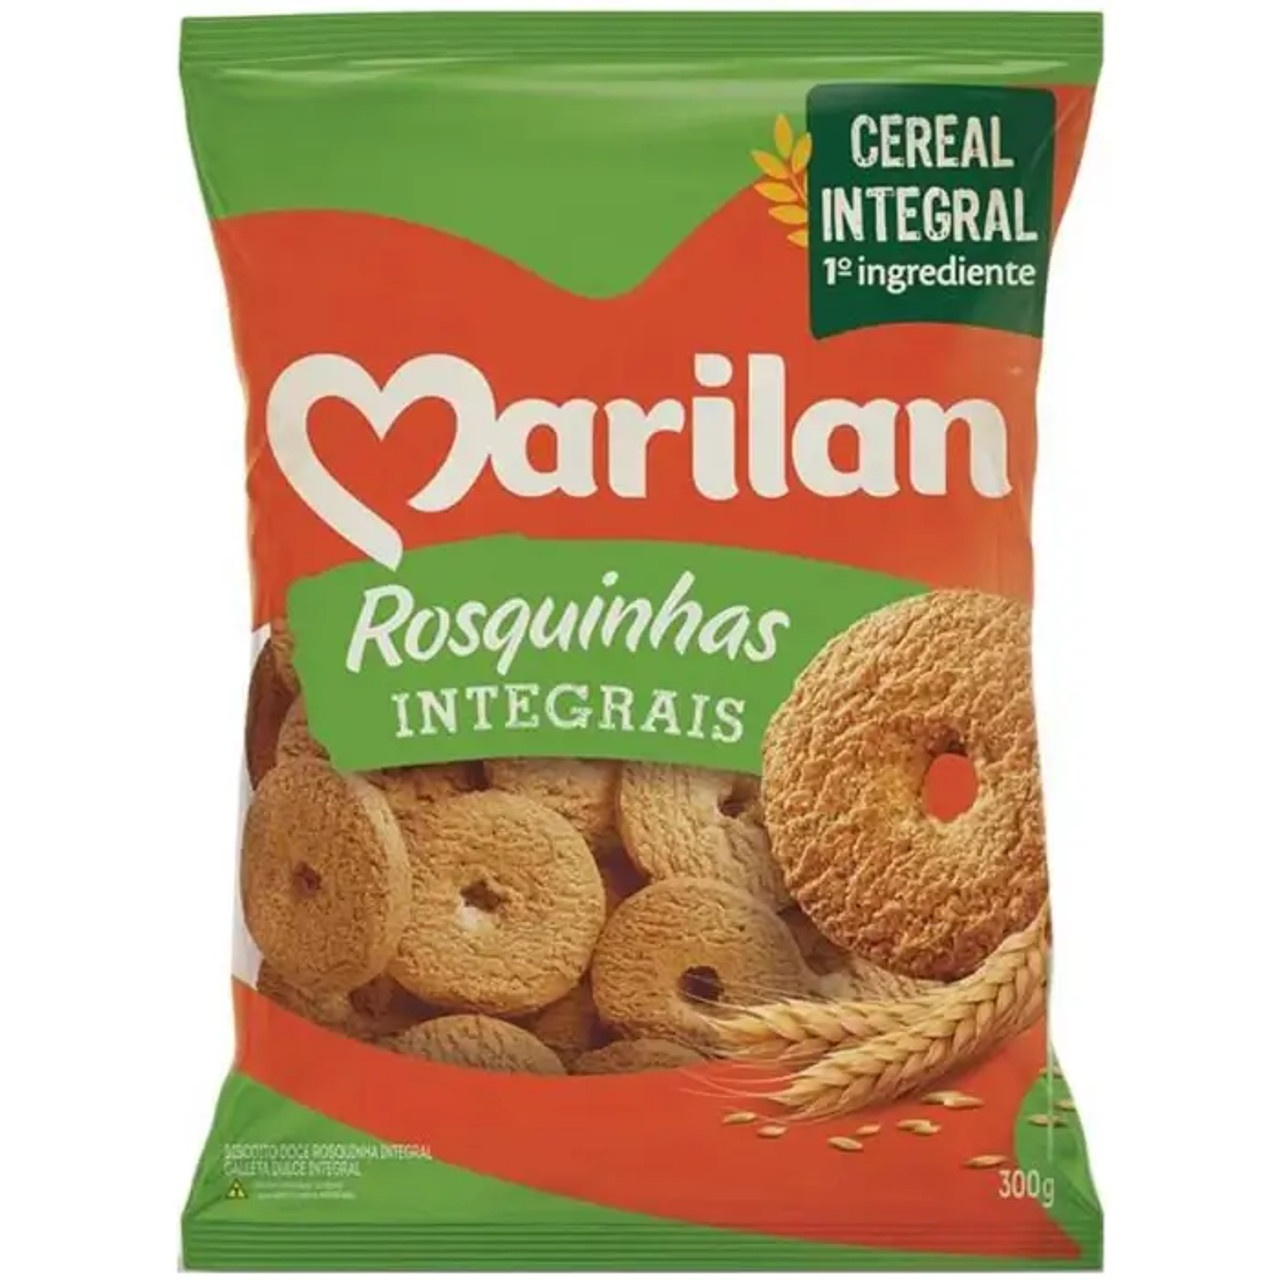 Marilan Whole Wheat Biscuit Sale - 32 Packs of 300g (Case) - Healthy Option - Chicken Pieces